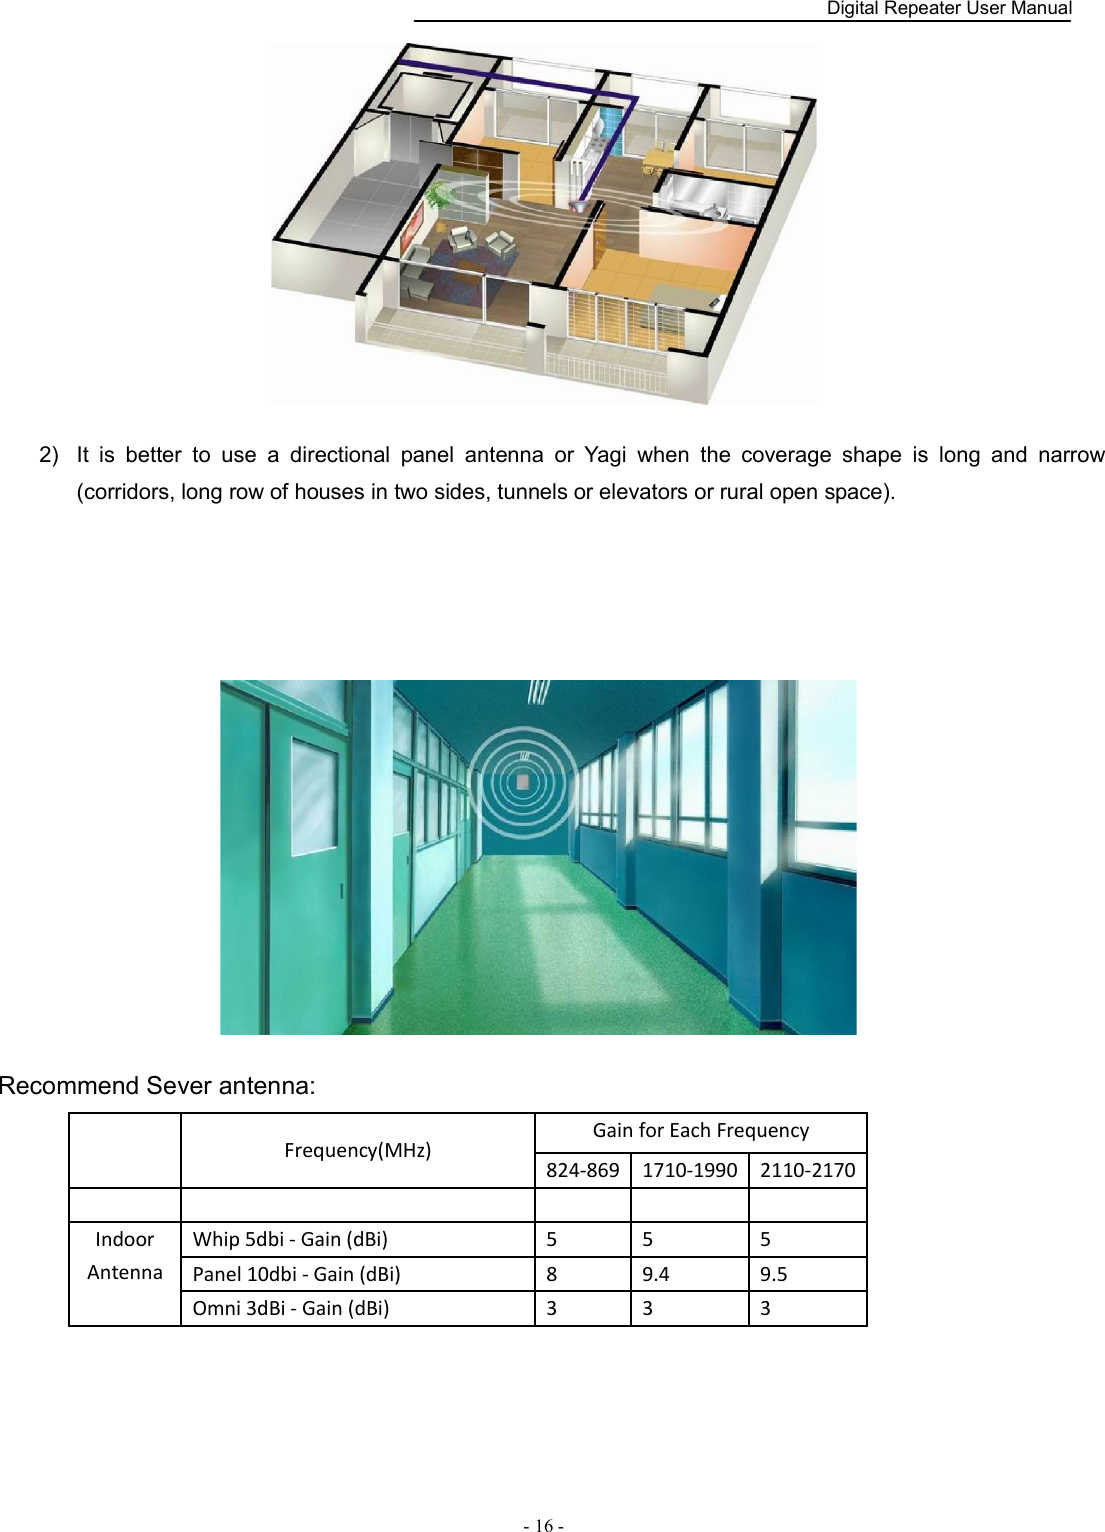    Digital Repeater User Manual  - 16 -    2)  It  is  better  to  use  a  directional  panel  antenna  or  Yagi  when  the  coverage  shape  is  long  and  narrow (corridors, long row of houses in two sides, tunnels or elevators or rural open space).     Recommend Sever antenna:   Frequency(MHz) Gain for Each Frequency    824-869 1710-1990 2110-2170           Indoor Antenna Whip 5dbi - Gain (dBi)  5  5  5 Panel 10dbi - Gain (dBi)  8  9.4  9.5 Omni 3dBi - Gain (dBi)  3  3  3  